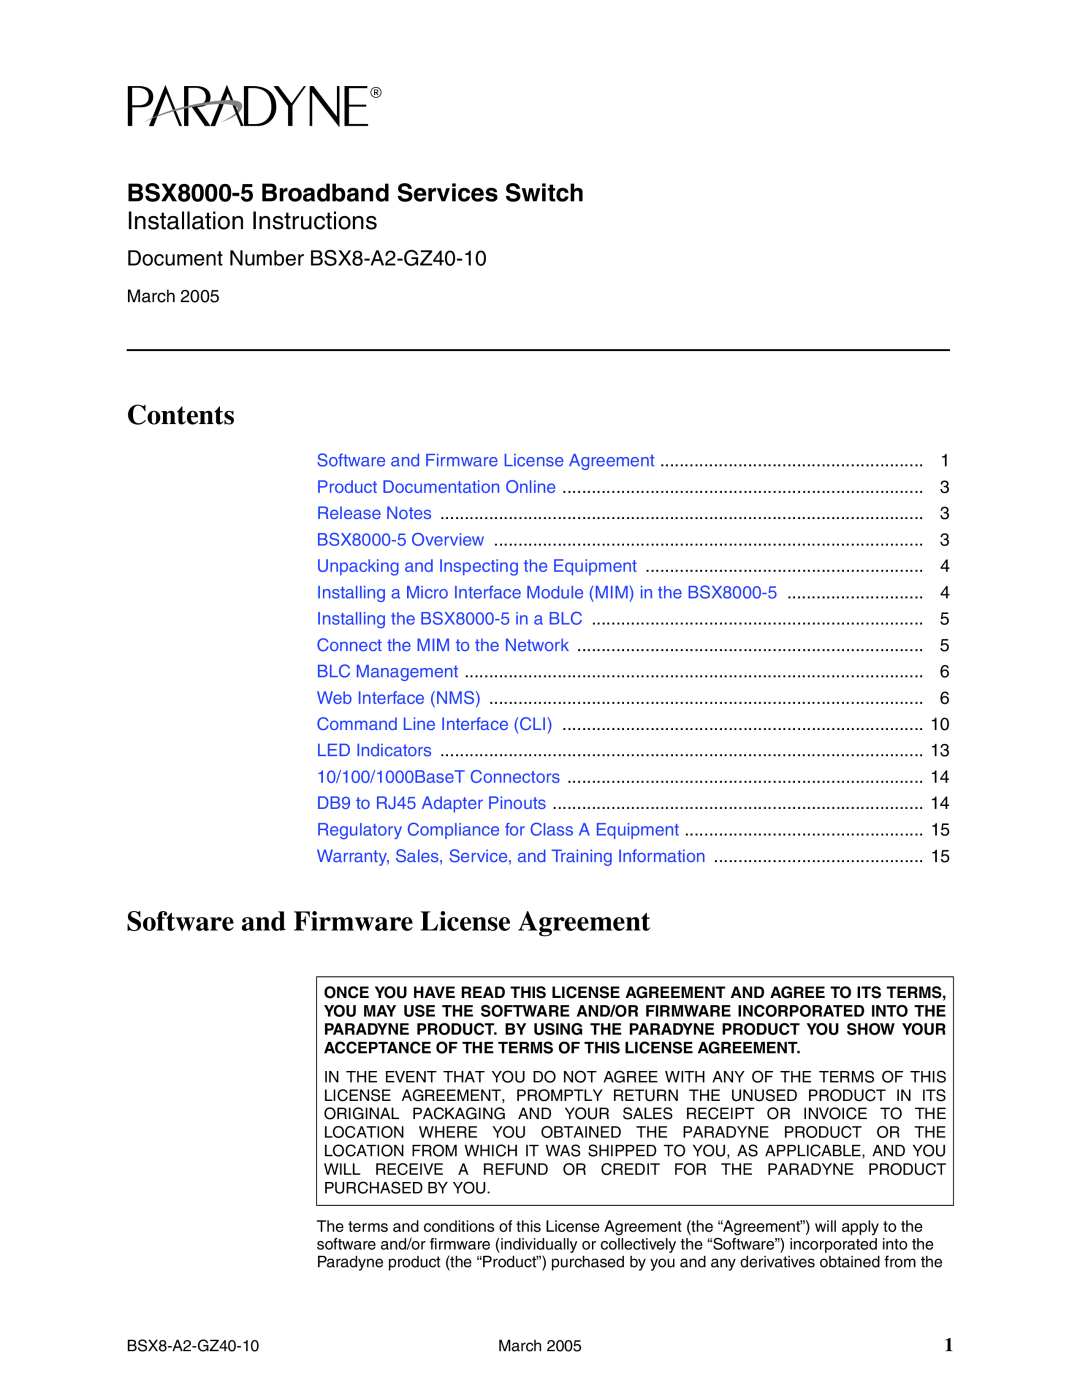 Paradyne Broadband Services Switch, BSX8000-5 installation instructions Contents, Software and Firmware License Agreement 